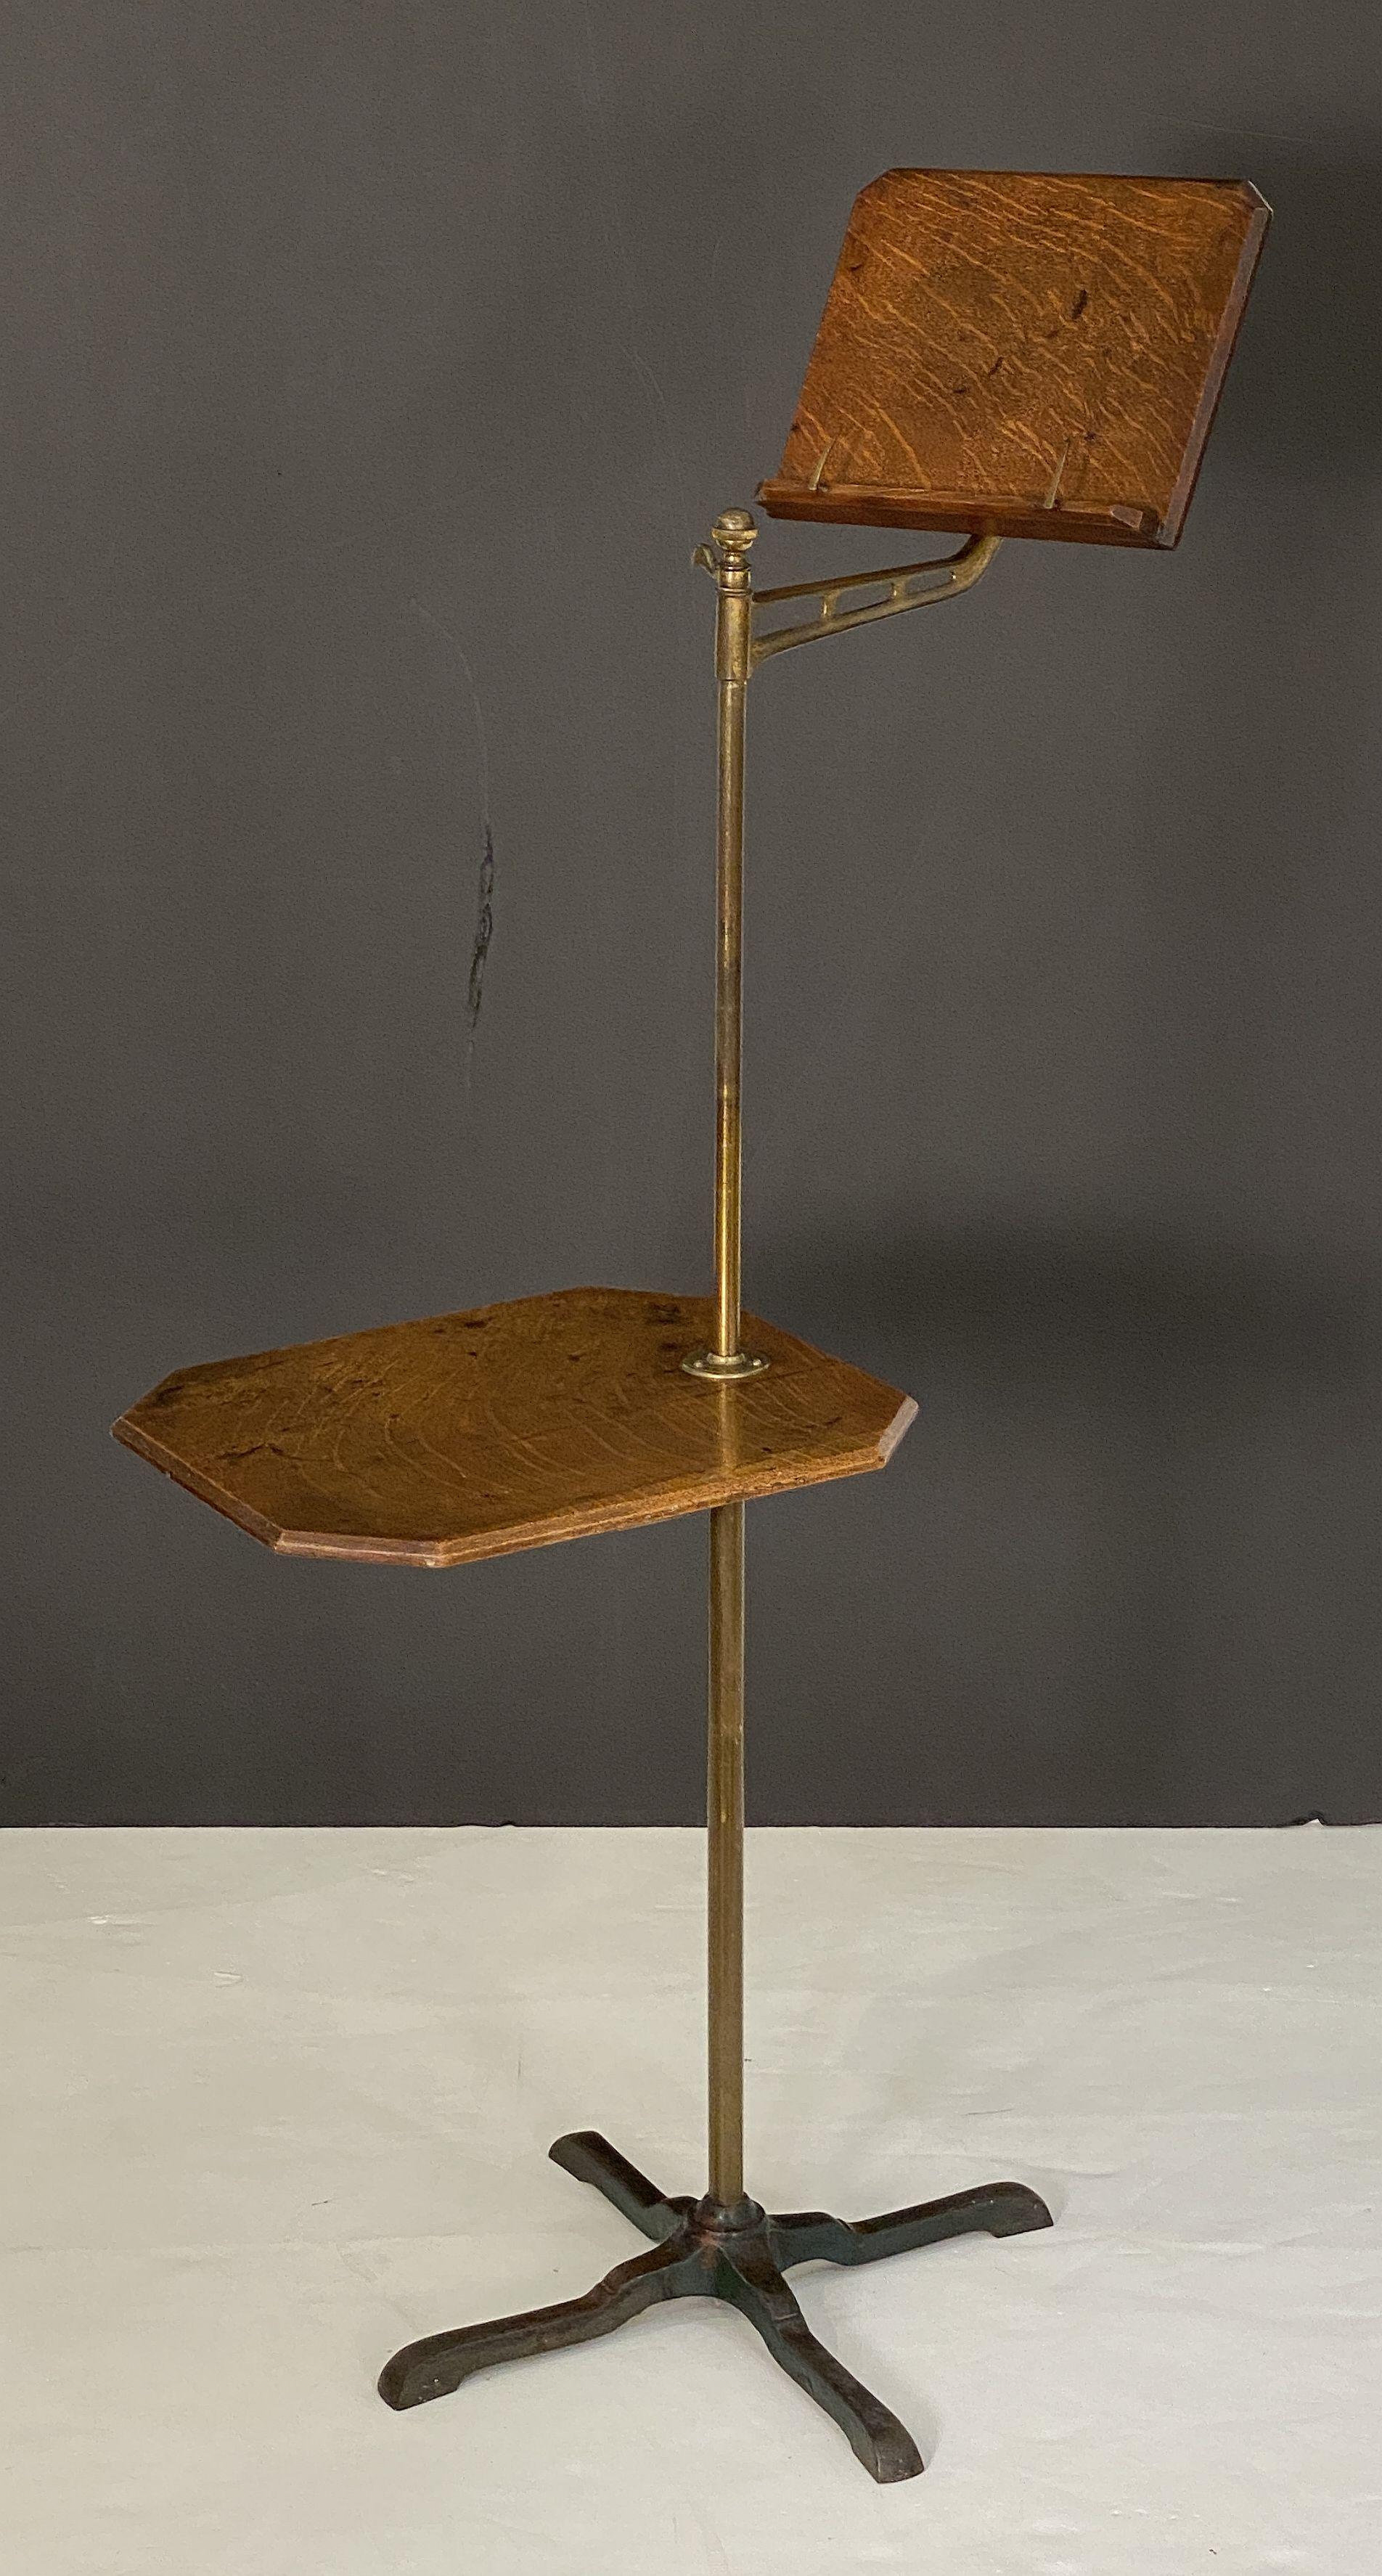 A handsome English adjustable book lectern or reading stand - the book rest of oak mounted to a stand of brass and affixed to a table top of oak with a brass column support with four-legged iron base.

Each part of the stand is adjustable - the